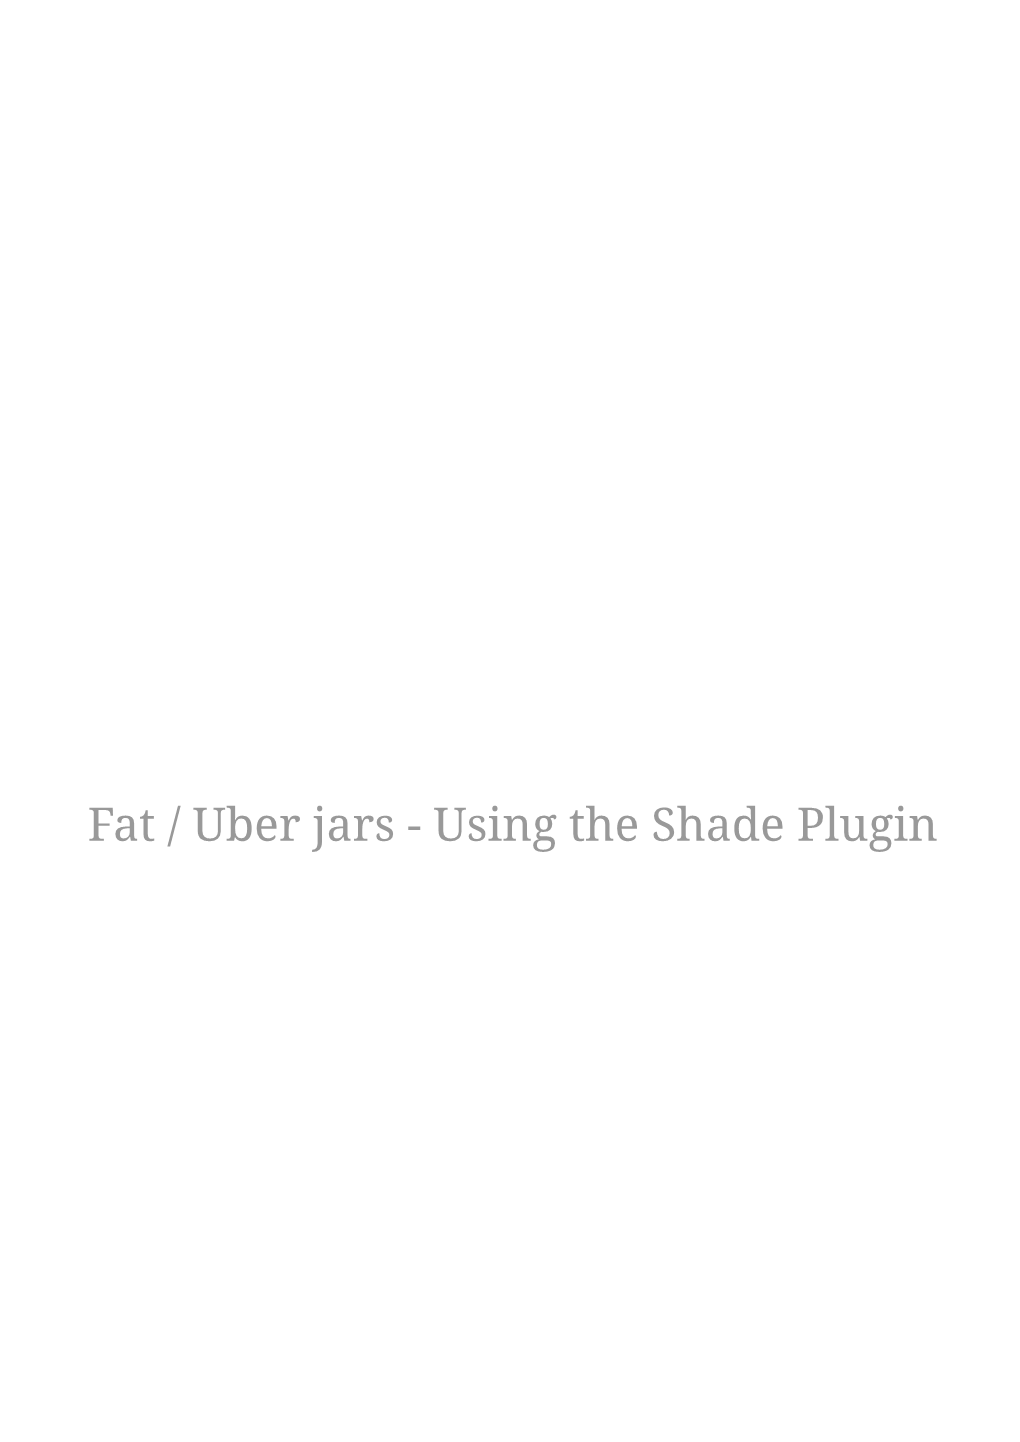 Fat / Uber Jars - Using the Shade Plugin Shading the Container and the Application Has Some Challenges Like Merging Correctly Resources (META-INF/Services/ Typically)